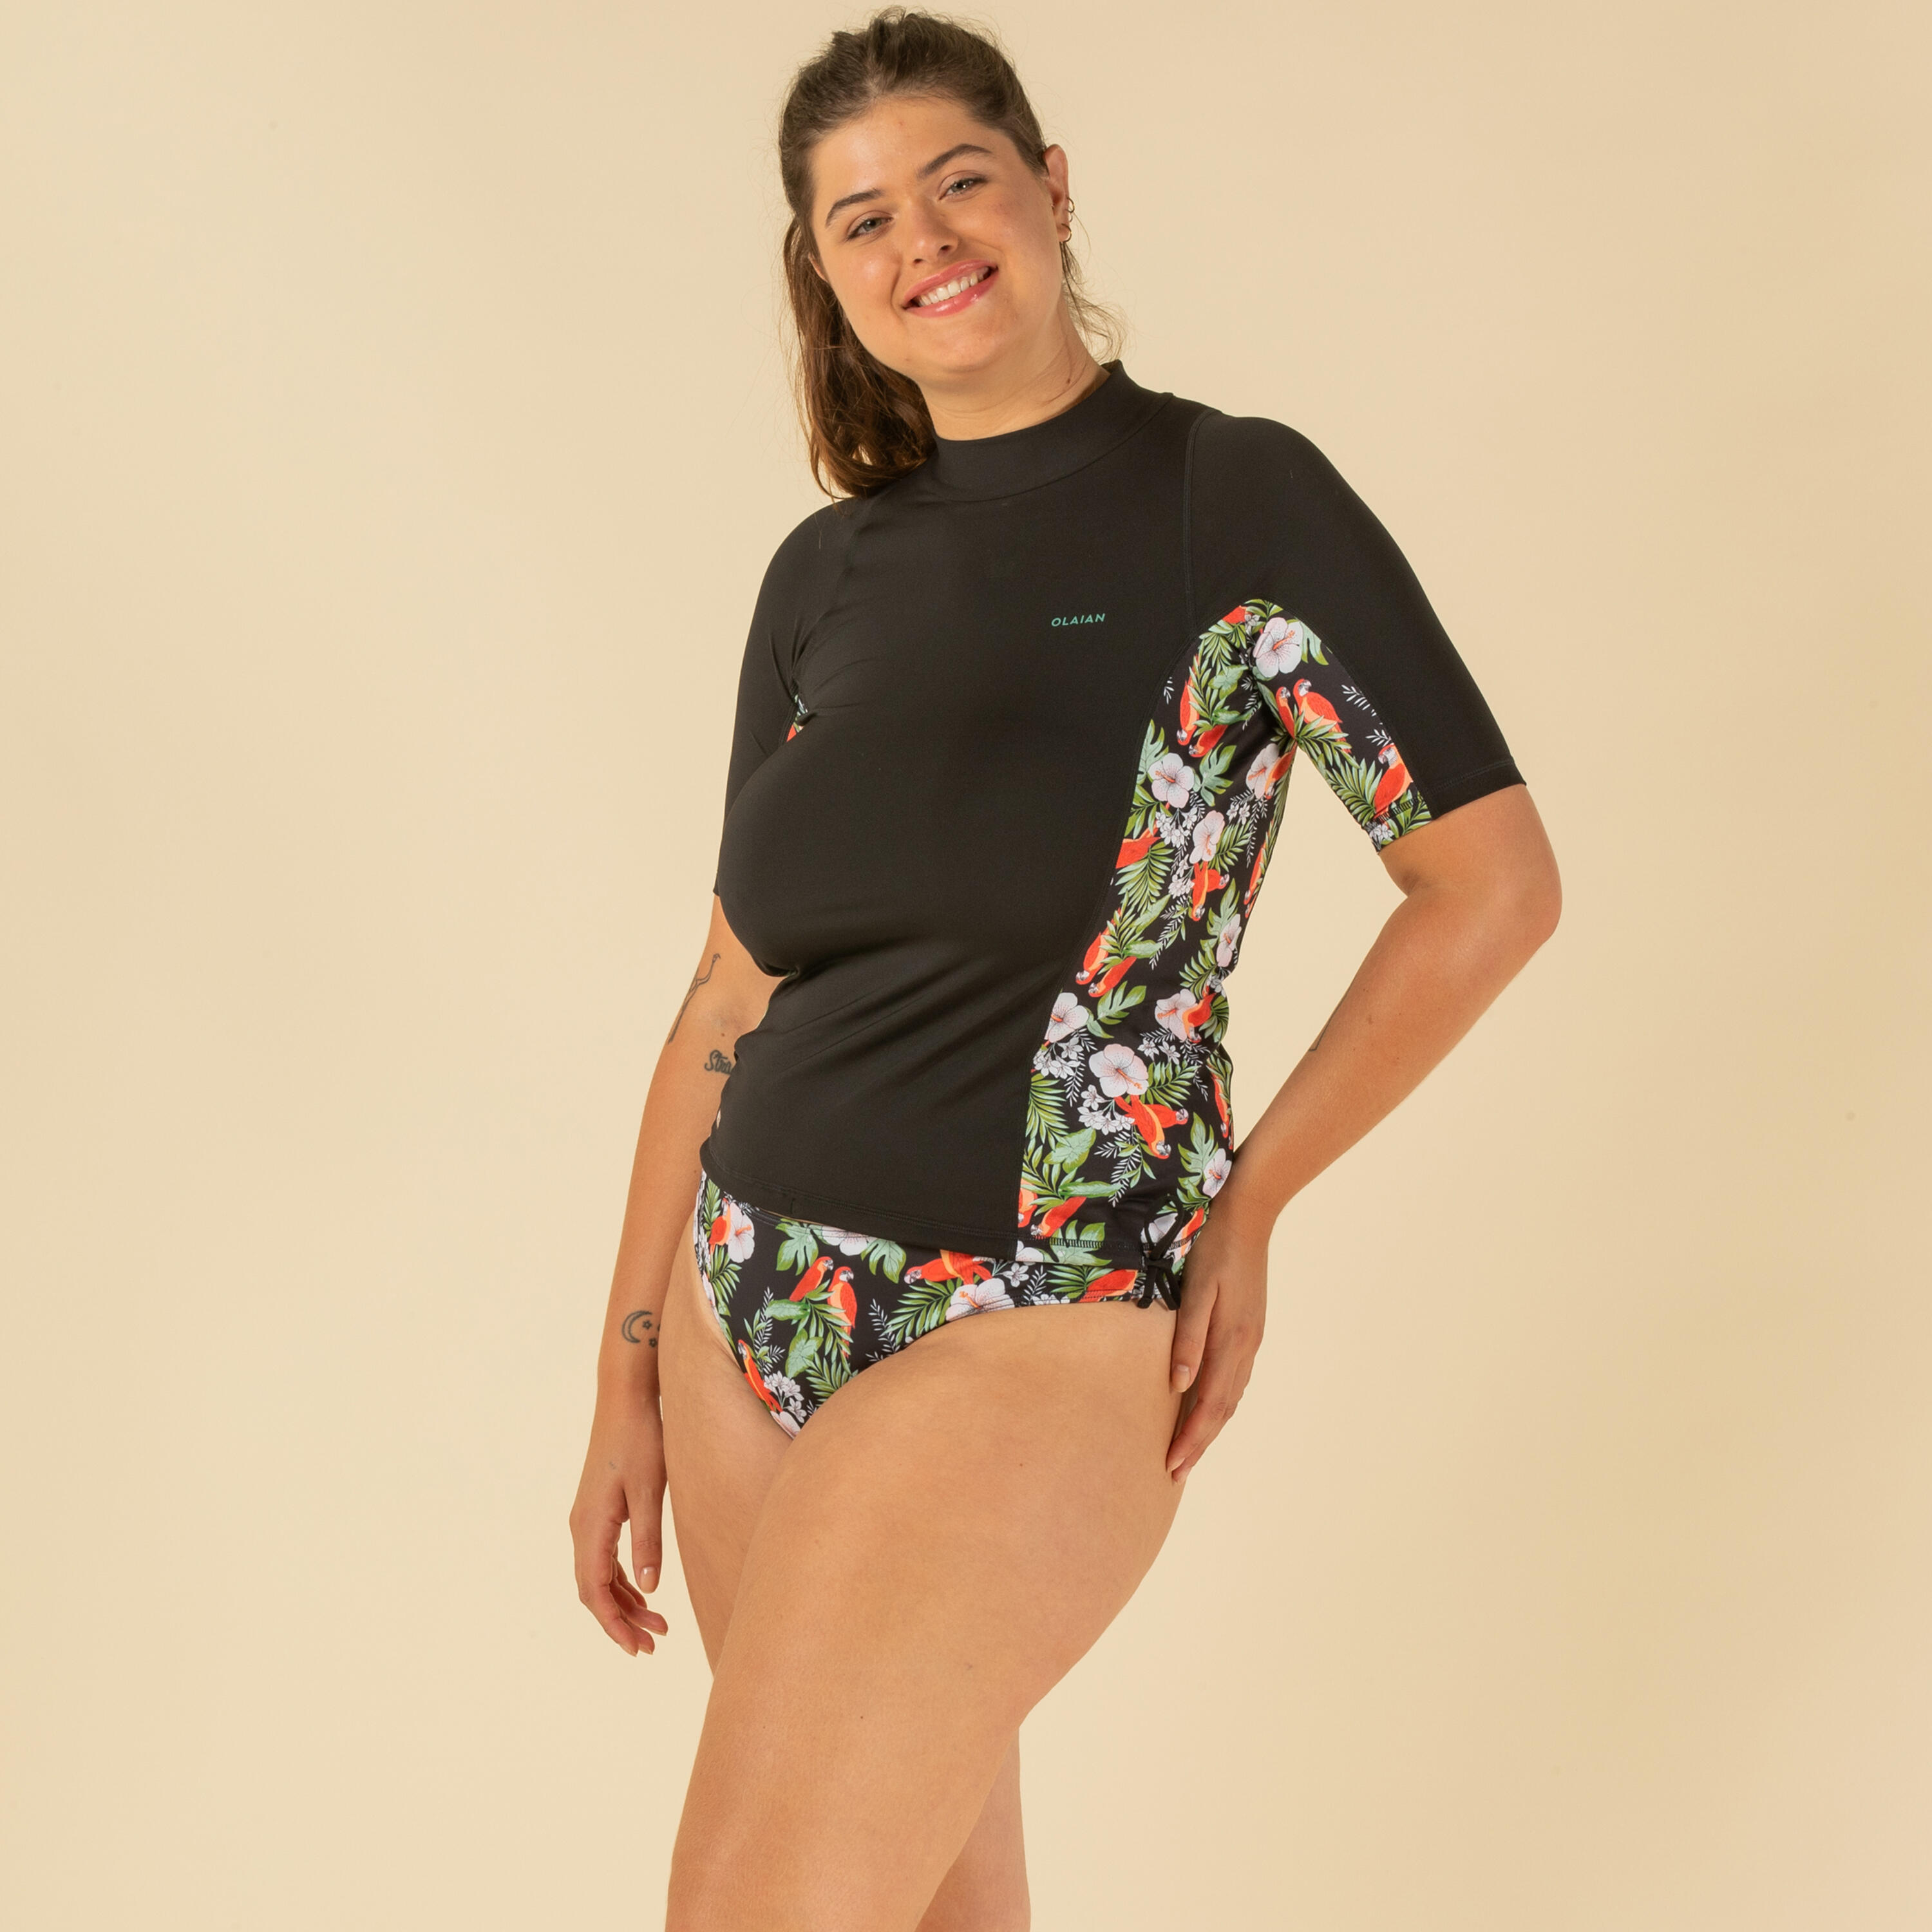 Women's UV-protective short sleeve T-shirt surf top 500 black and floral PARROT 3/8